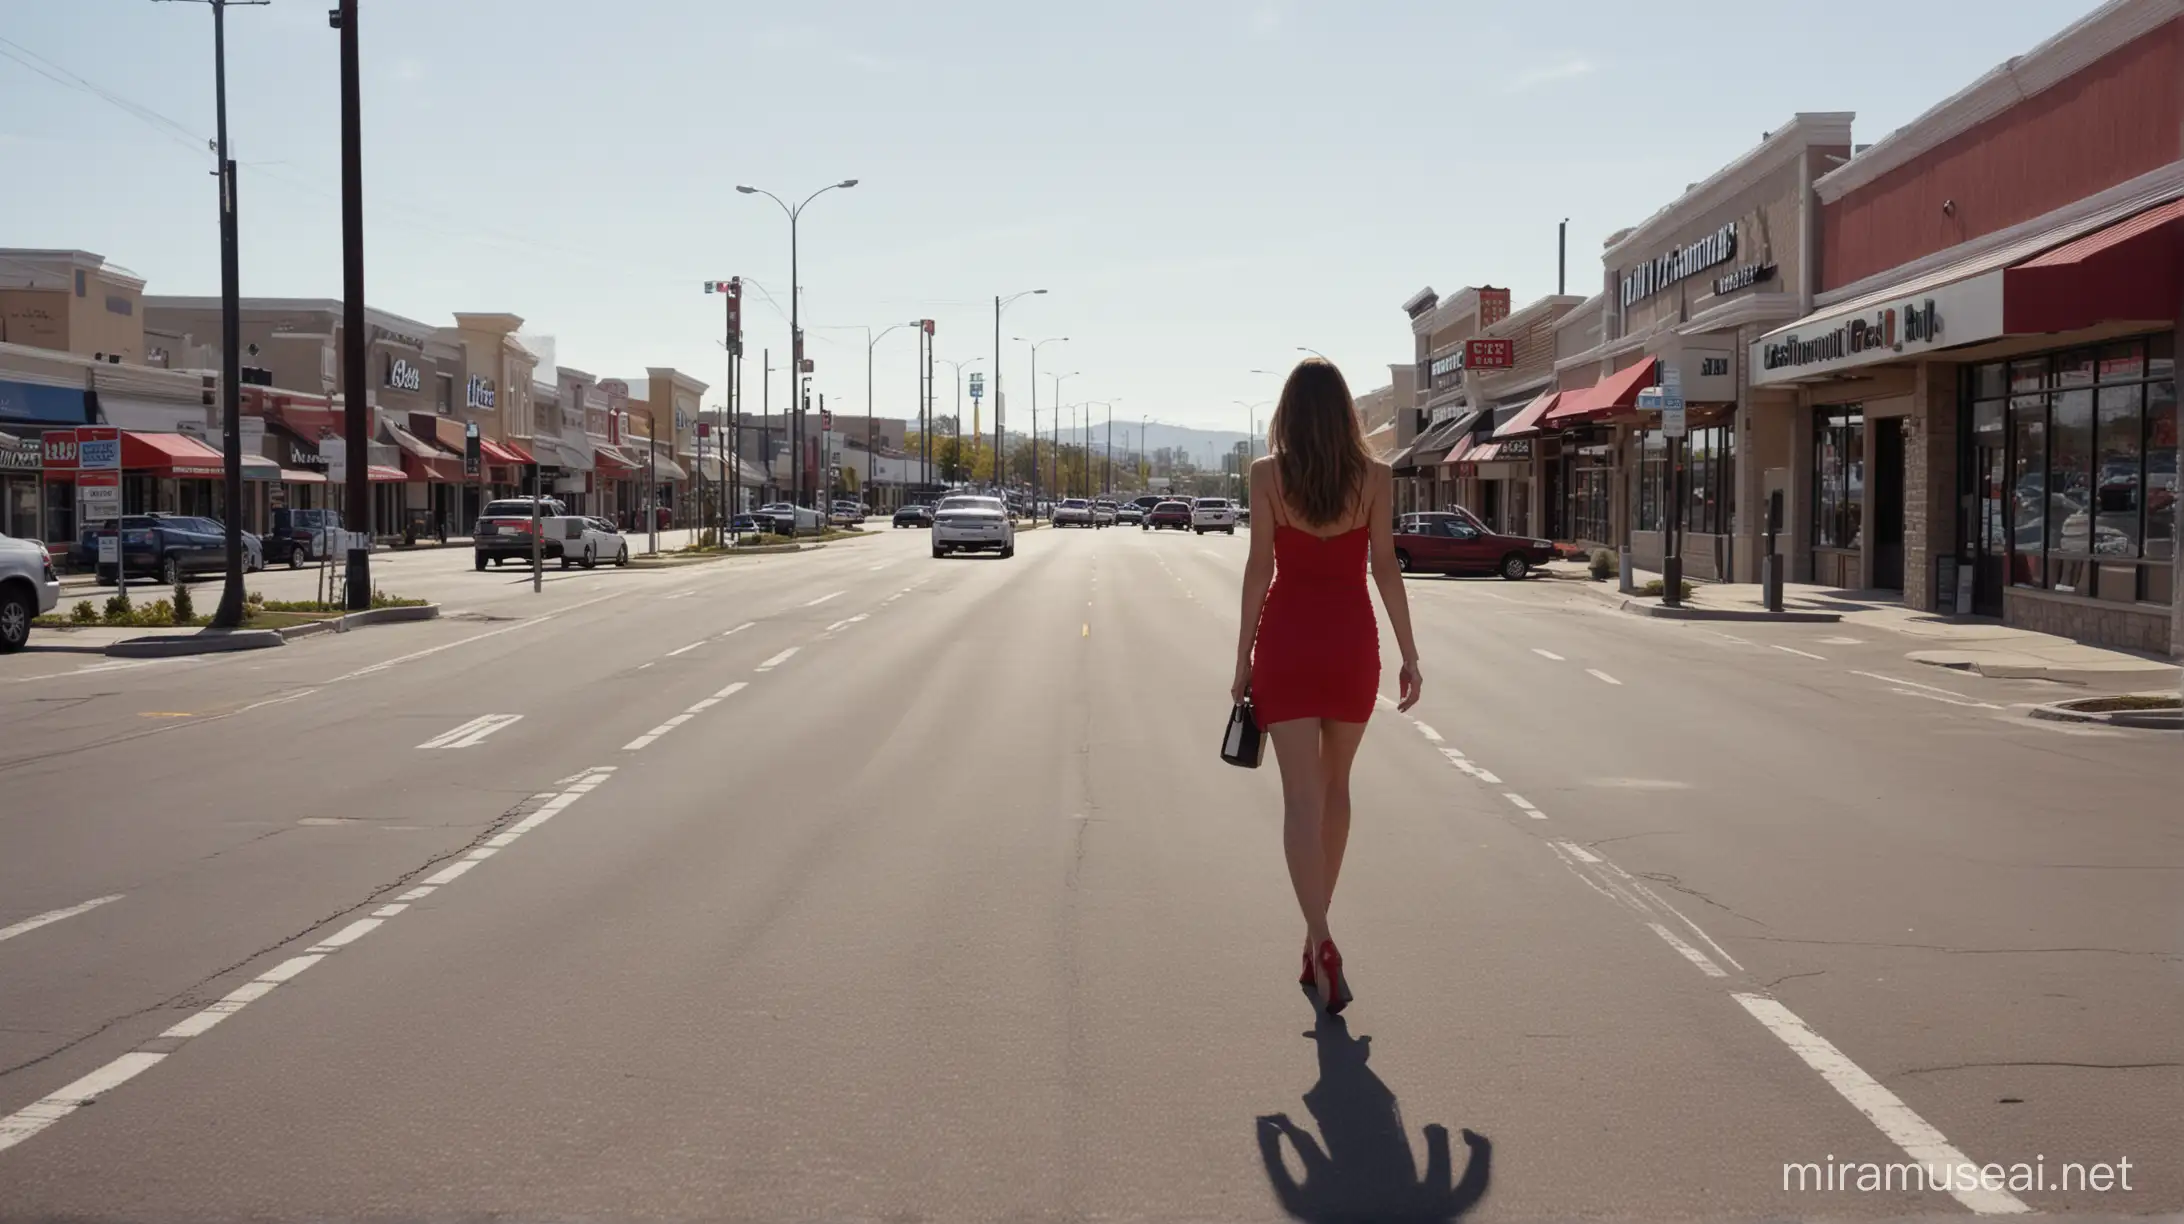 woman in sexy red dress, frontal, walking at sidewalk at deserted American multi-lane suburban wide road, (stroad) lined with various strip malls, chain brands, parking lots, car dealers and big-lot retailers on either side 